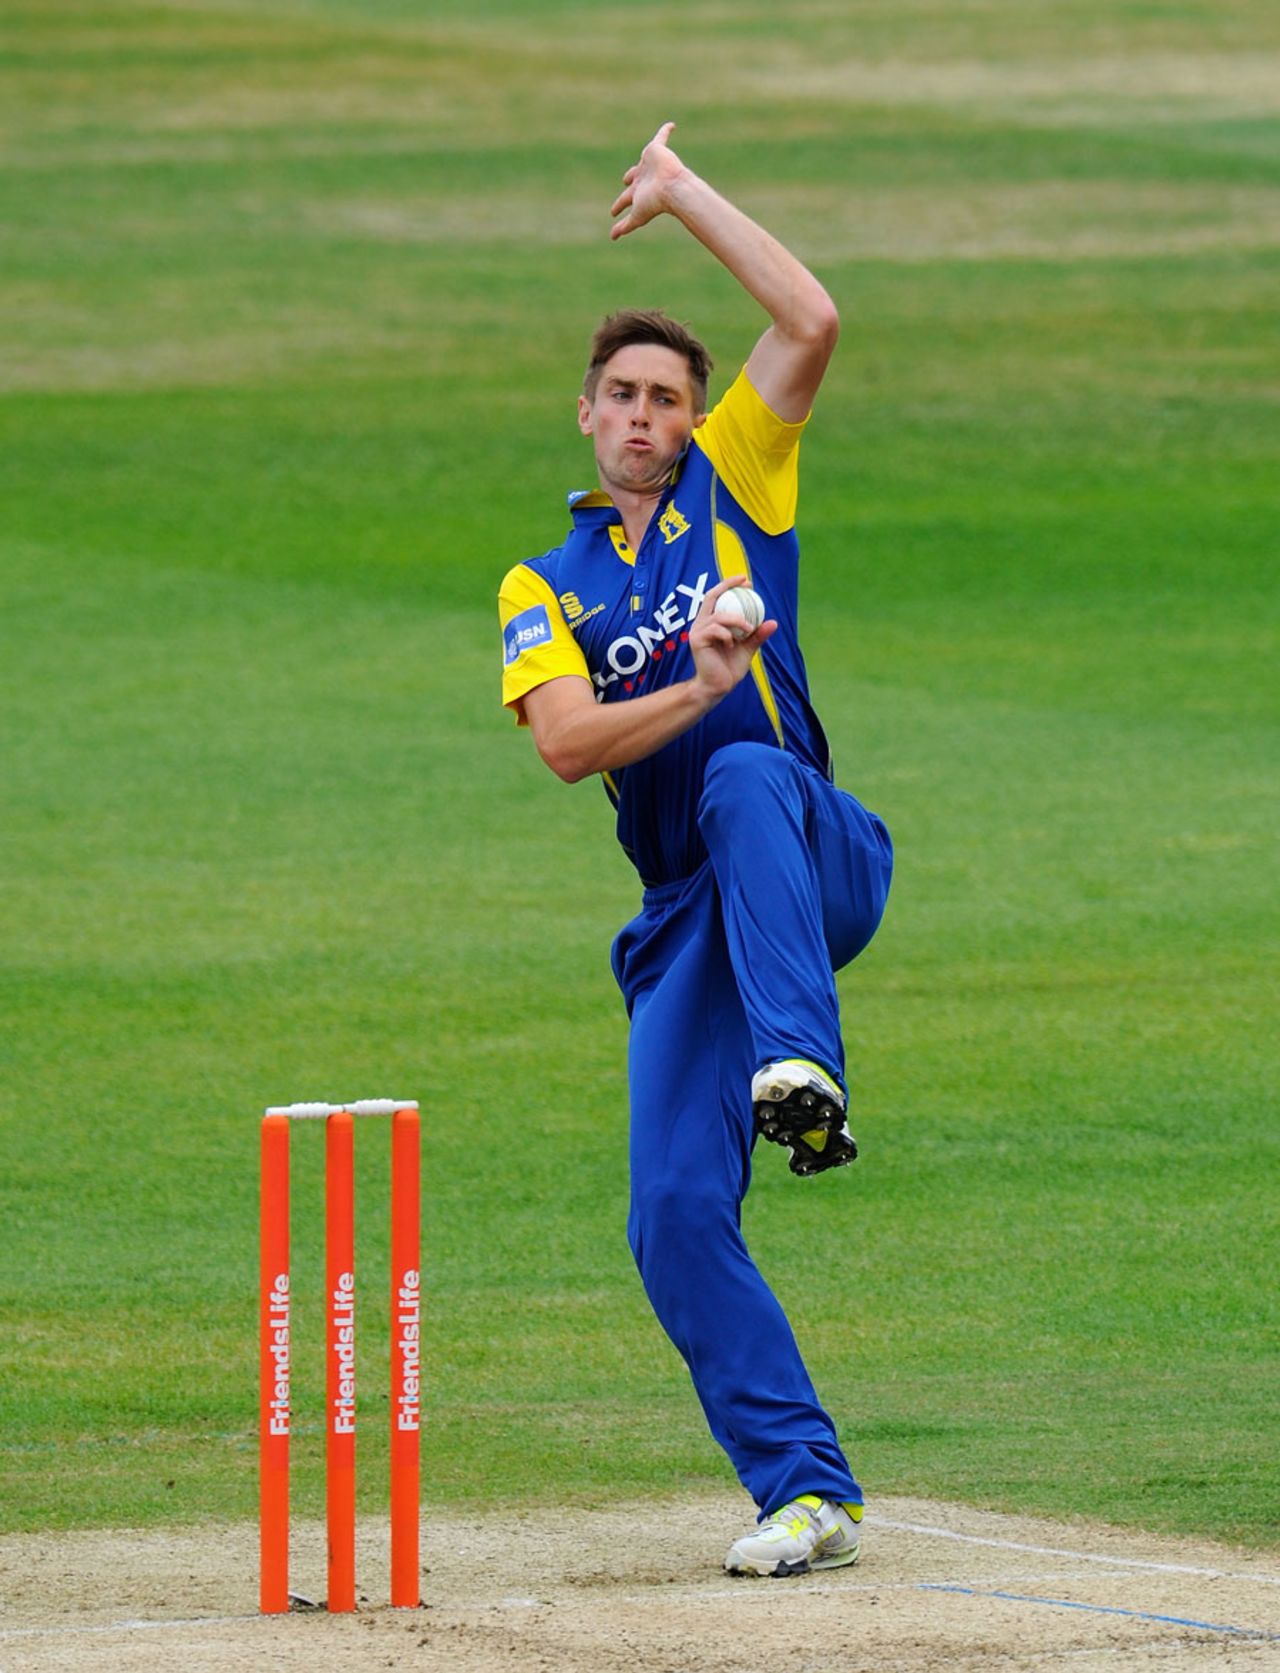 Chris Woakes bowled a tight spell of 2 for 16, Warwickshire v Northamptonshire, FLt20, Mid/West/Wales, Edgbaston, July 20, 2103